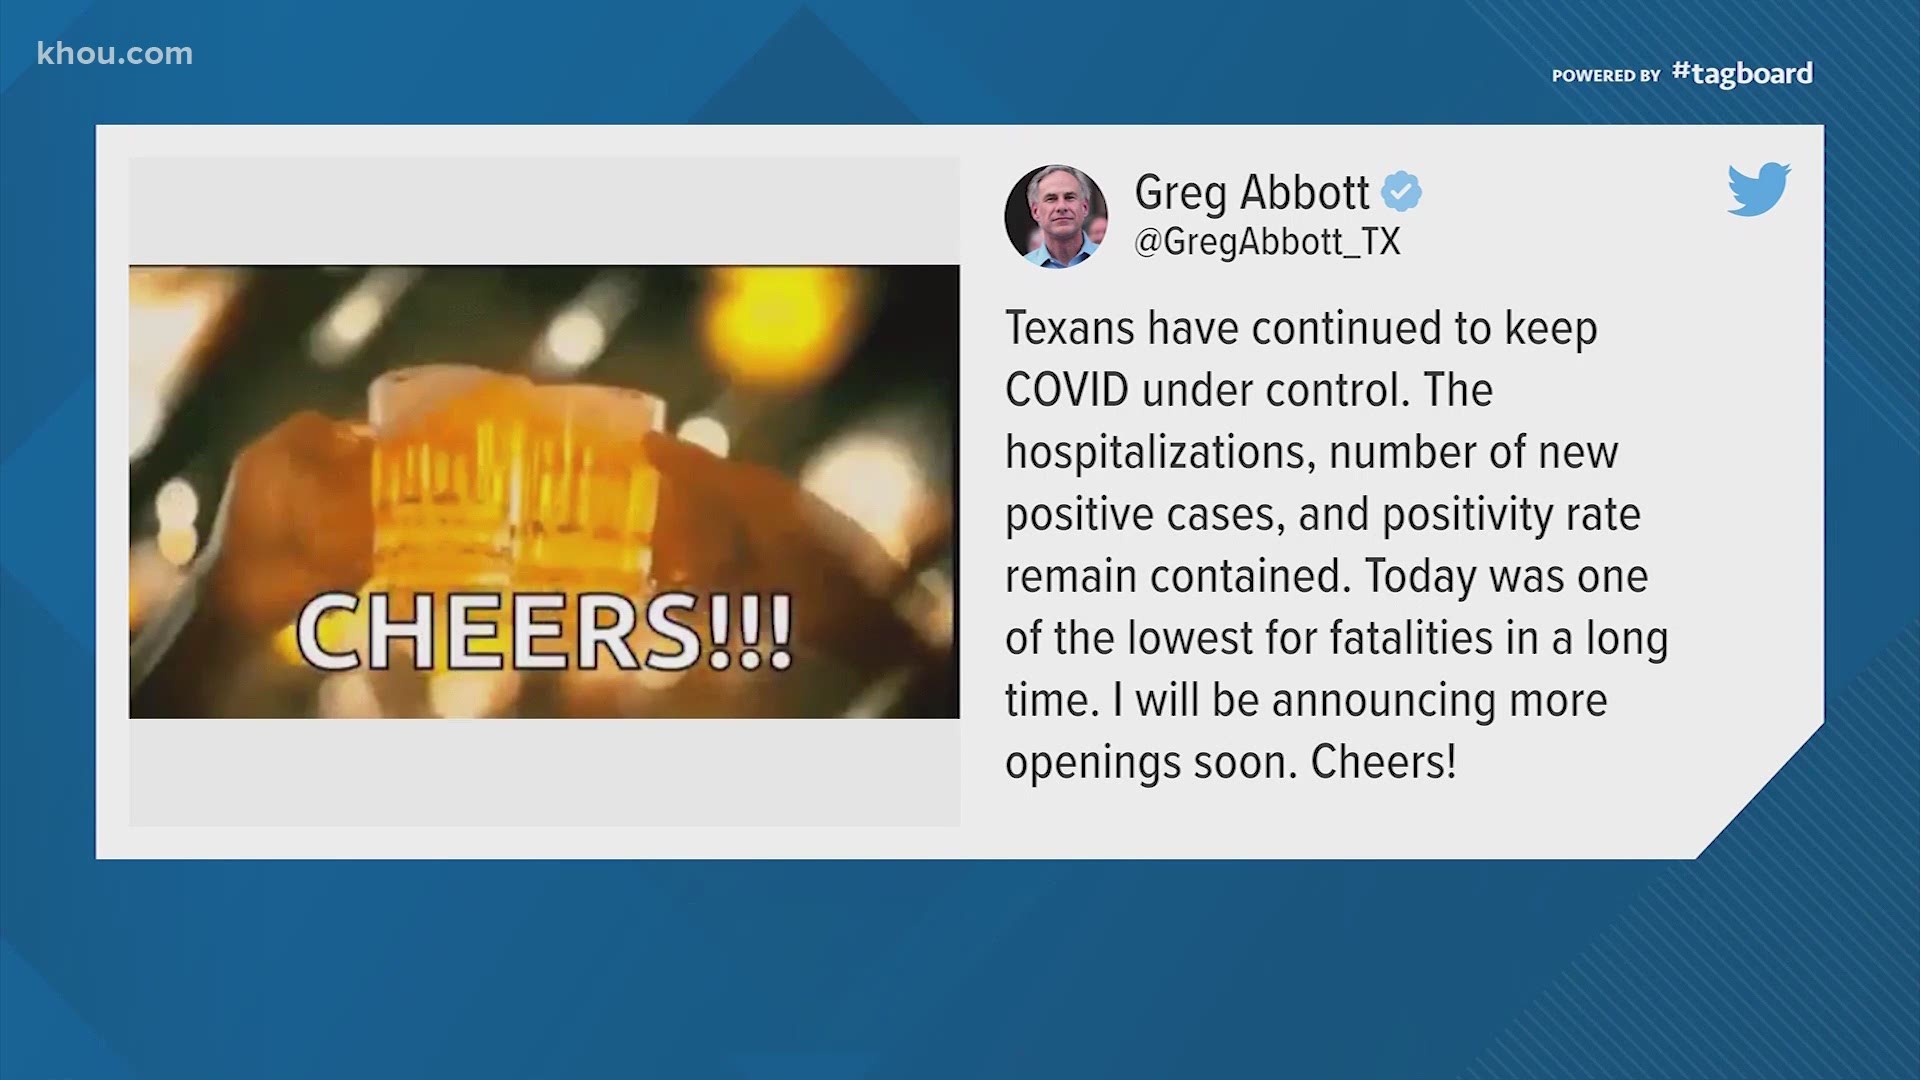 Gov. Greg Abbott tweeted a picture of two hands holding beer mugs saying he'd be announcing more openings soon.